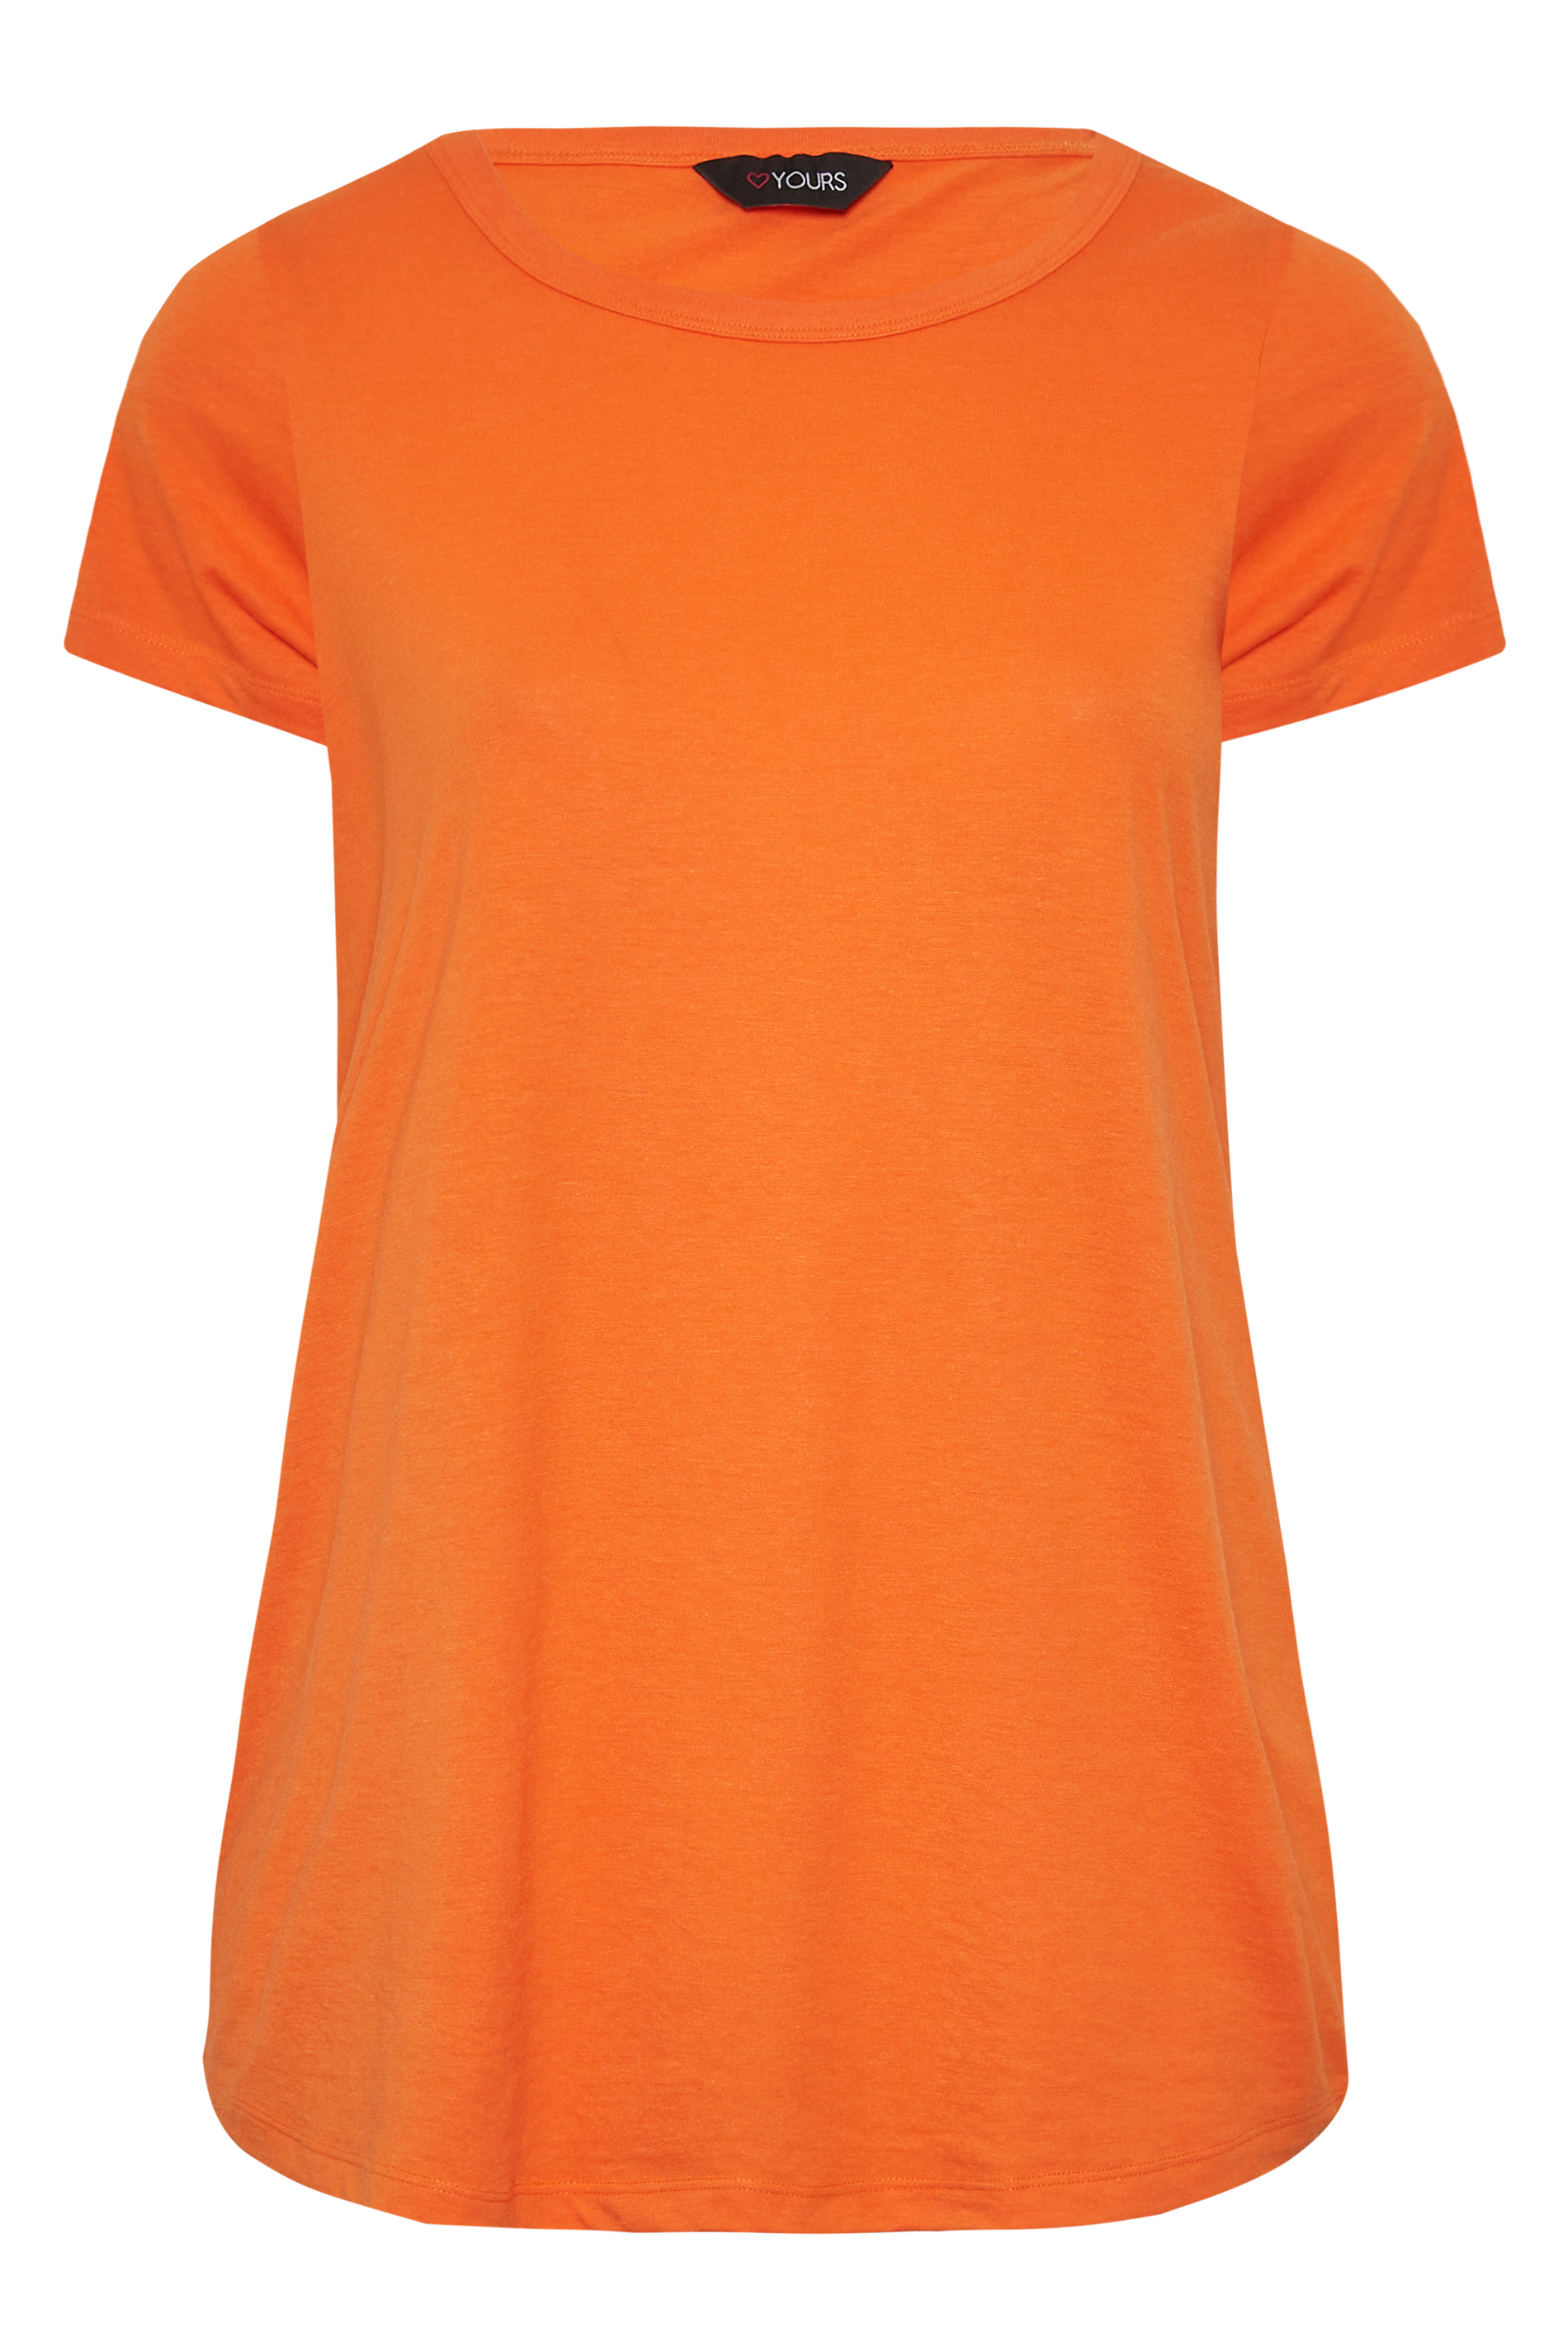 YOURS Curve Plus Size 3 PACK Lime Green & Orange Essential T-Shirts ...